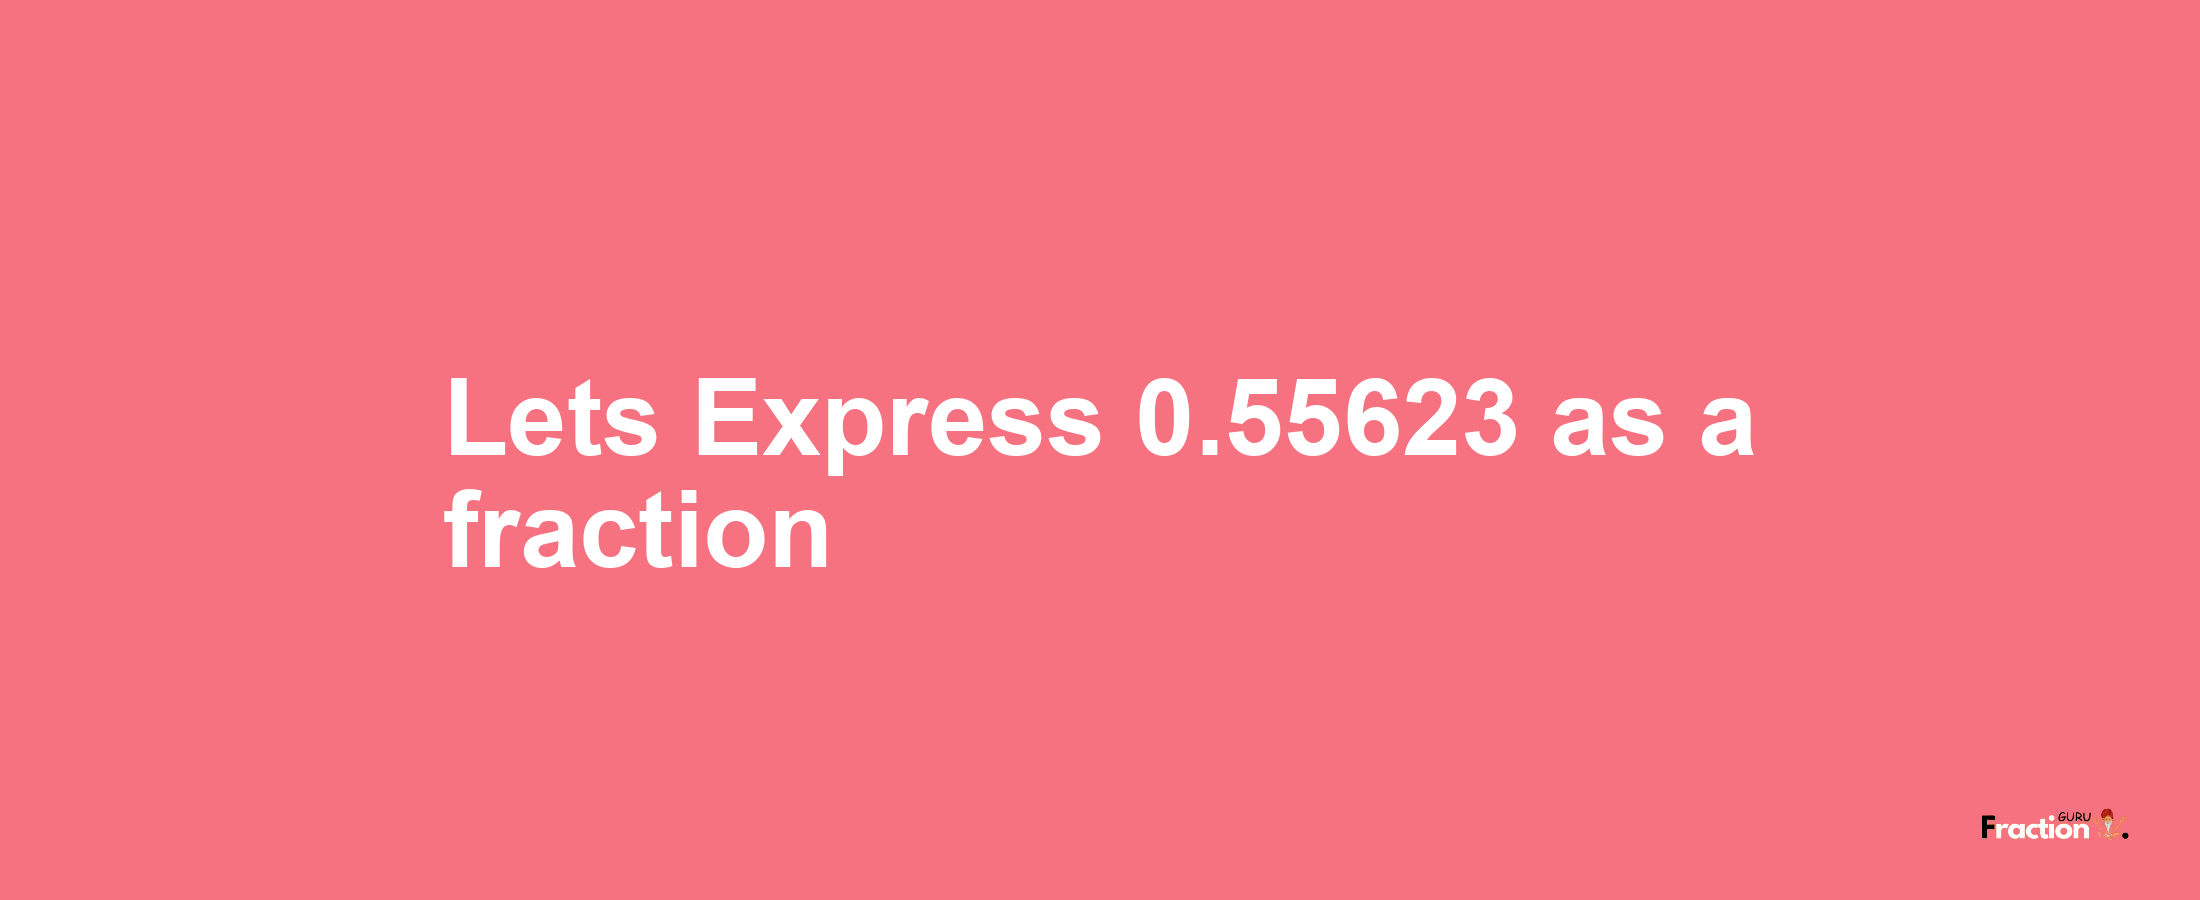 Lets Express 0.55623 as afraction